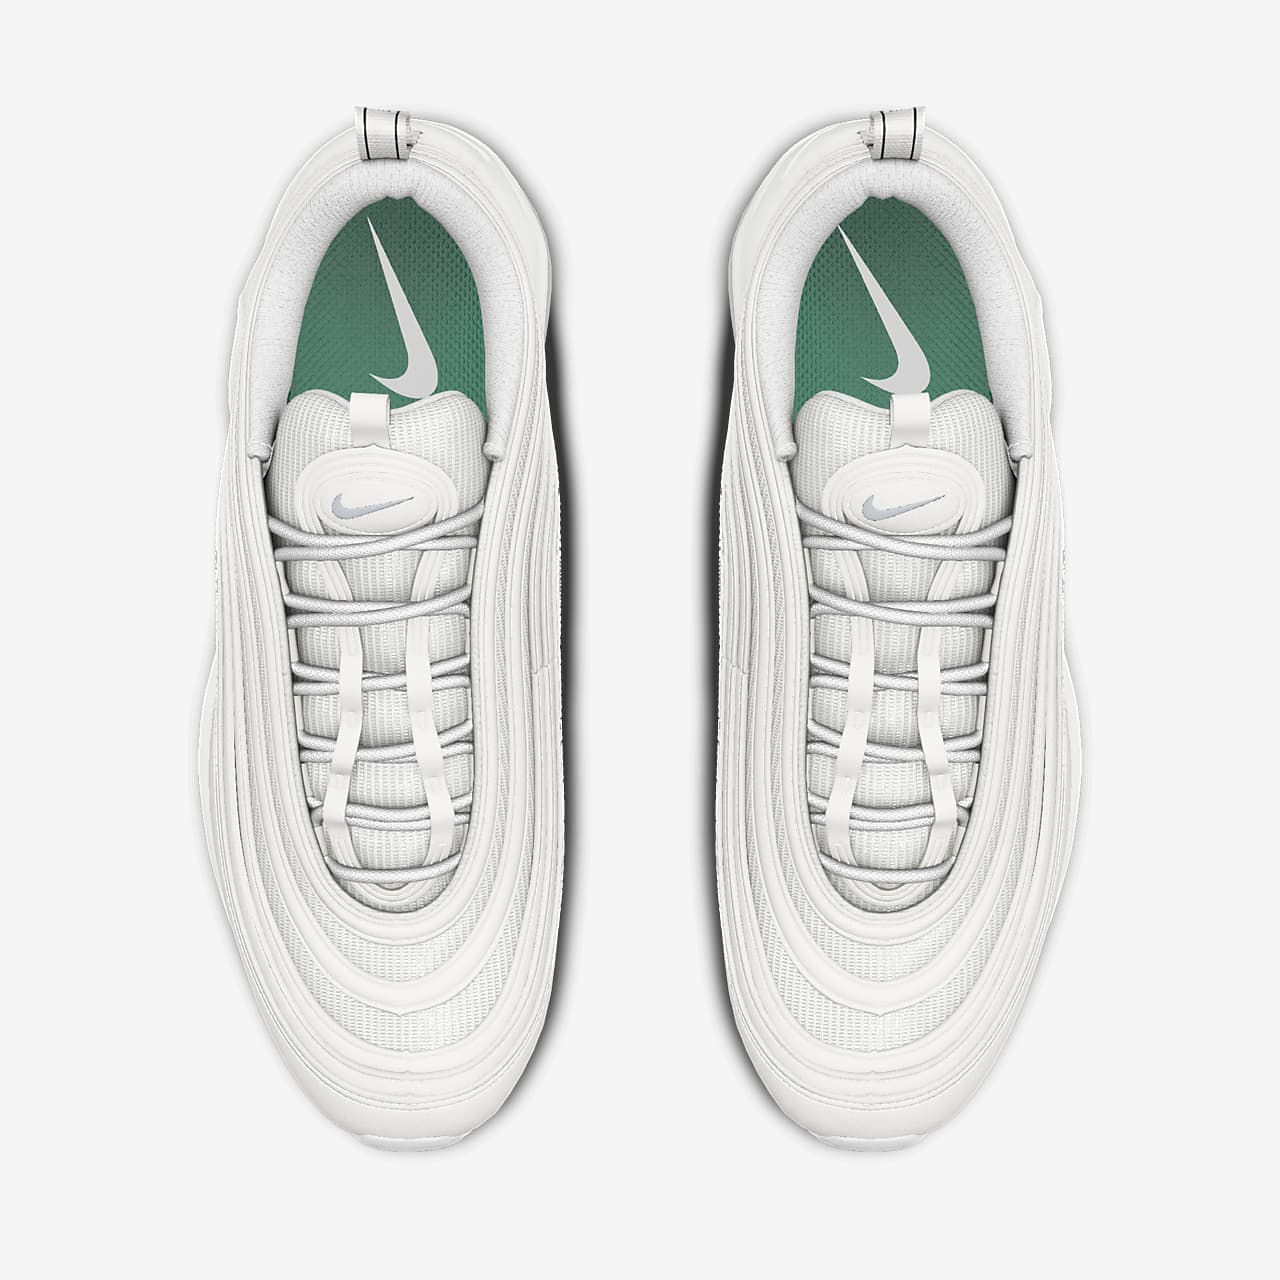 Nike Air Max 97 Next Nature Women's Shoes.